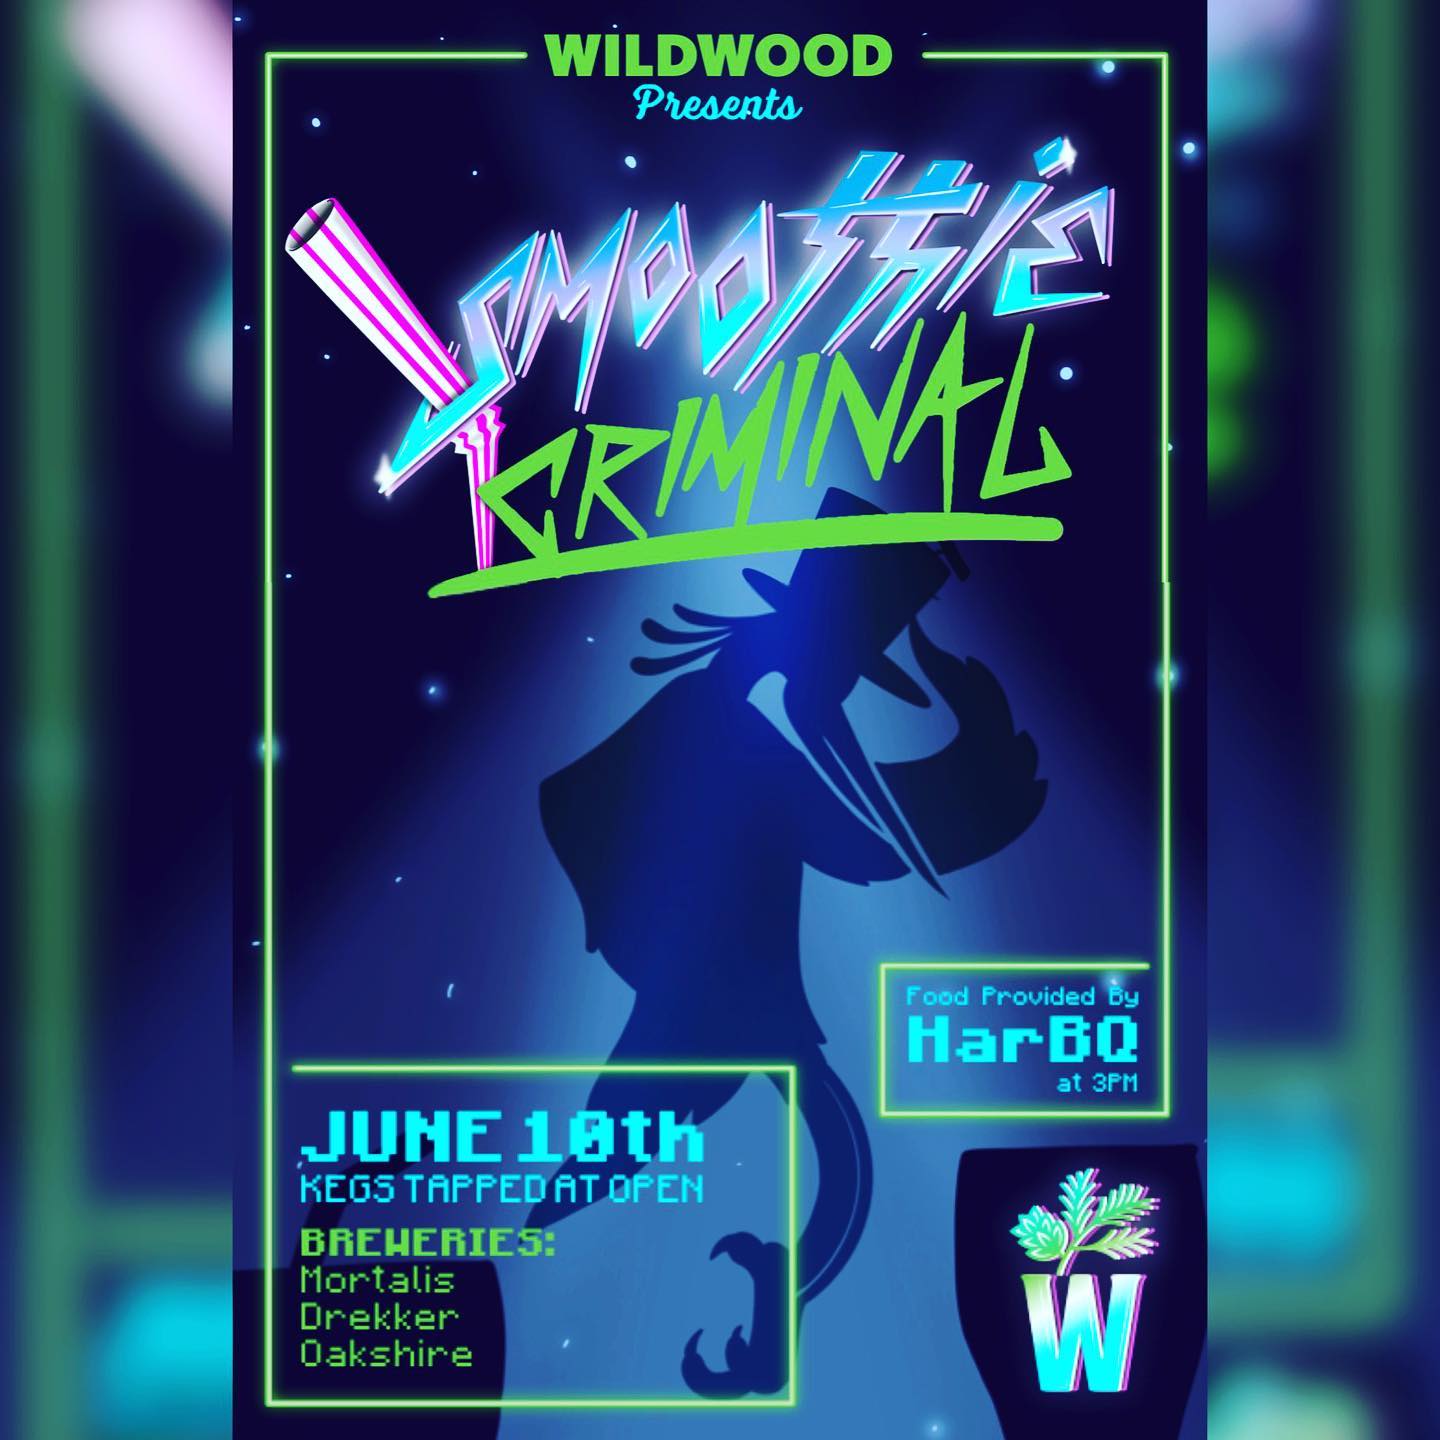 🚨 SMOOTHIE CRIMINAL 🚨 
Oh yes, we are doing it again!!!
.
June 10th we are bringing in Drekker, Mortalis & Oakshire! Not only will we have some of their smoothie style beers available but also an array of other styles showcasing the other styles they excel at! Don’t miss this!
.
Along with these wonderful beers we will have HarBQ slinging his wonderful barbecue for everyone to enjoy starting at 3pm. 
.
Kegs tapped at open, 12 noon. 
Food service - 3pm
.
@drekkerbrewing 
@mortalisbrewing 
@oakbrew 
@har.bq.pdx 
.
Illustration: @rgonzo_designs 
.
.
#wildwoodtap #wildwoodtaphouse #hillsborooregon #smoothiebeer #drekkerbrewing #mortalisbrewingcompany #oakshirebrewing #harbq #portlandbbq #craftbeer #beerme #pdxbeer #pnwbeer #portlandbeerevents #beerevents #pdx #pnw #twoisaparty